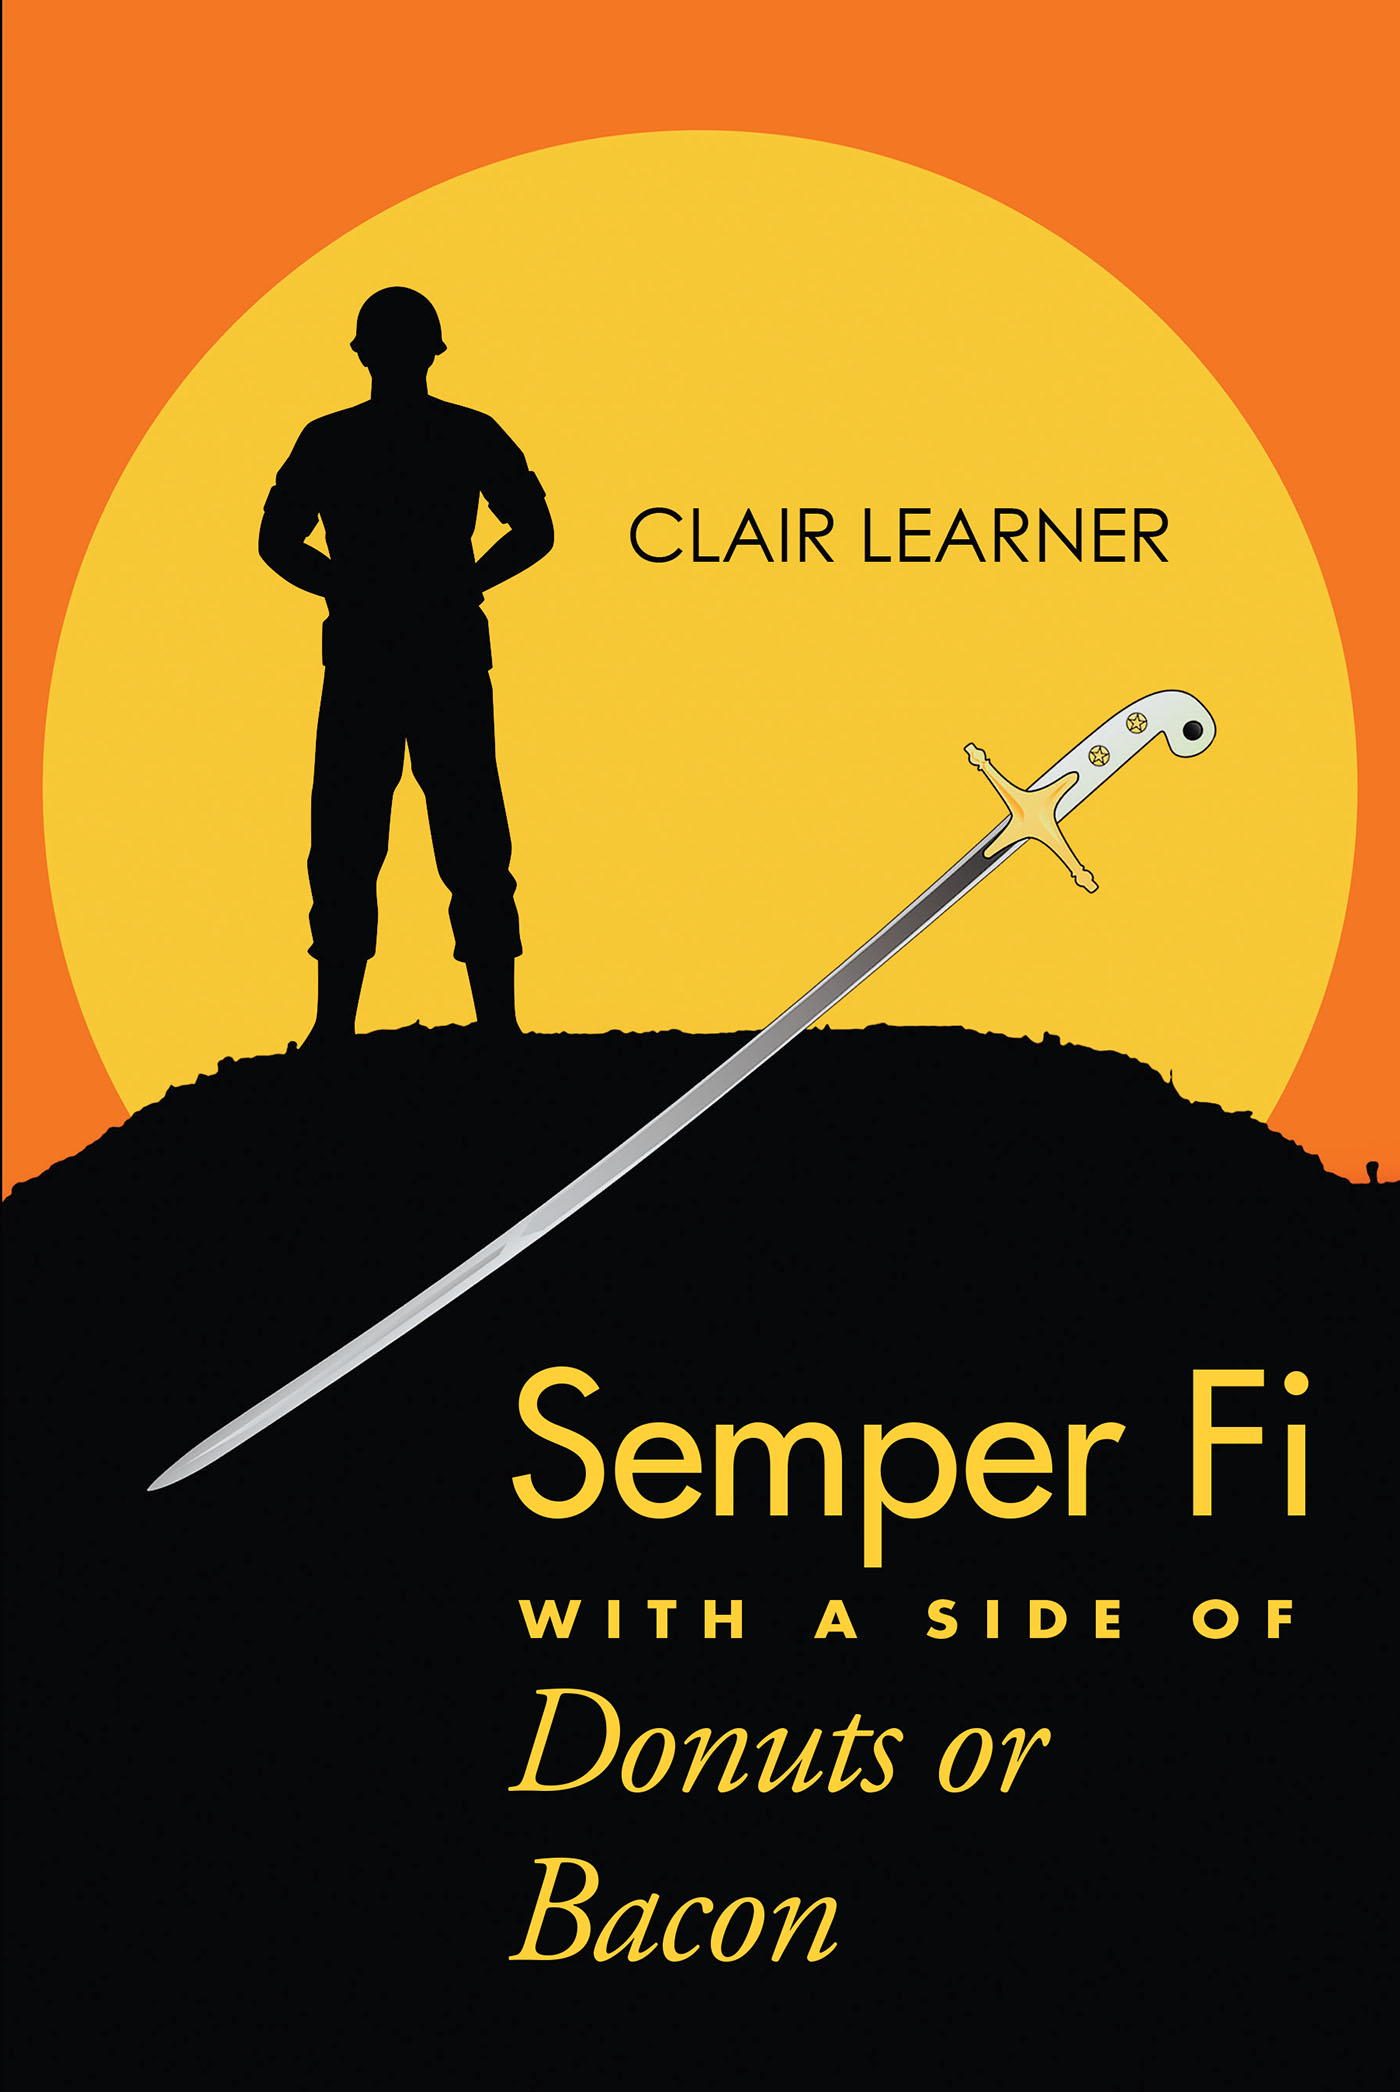 Author Clair Learner’s New Book, "Semper Fi with a Side of Donuts or Bacon," is a Captivating Story That Follows Marine Corps Captain Abe Rush as She Helps a Lost Soul